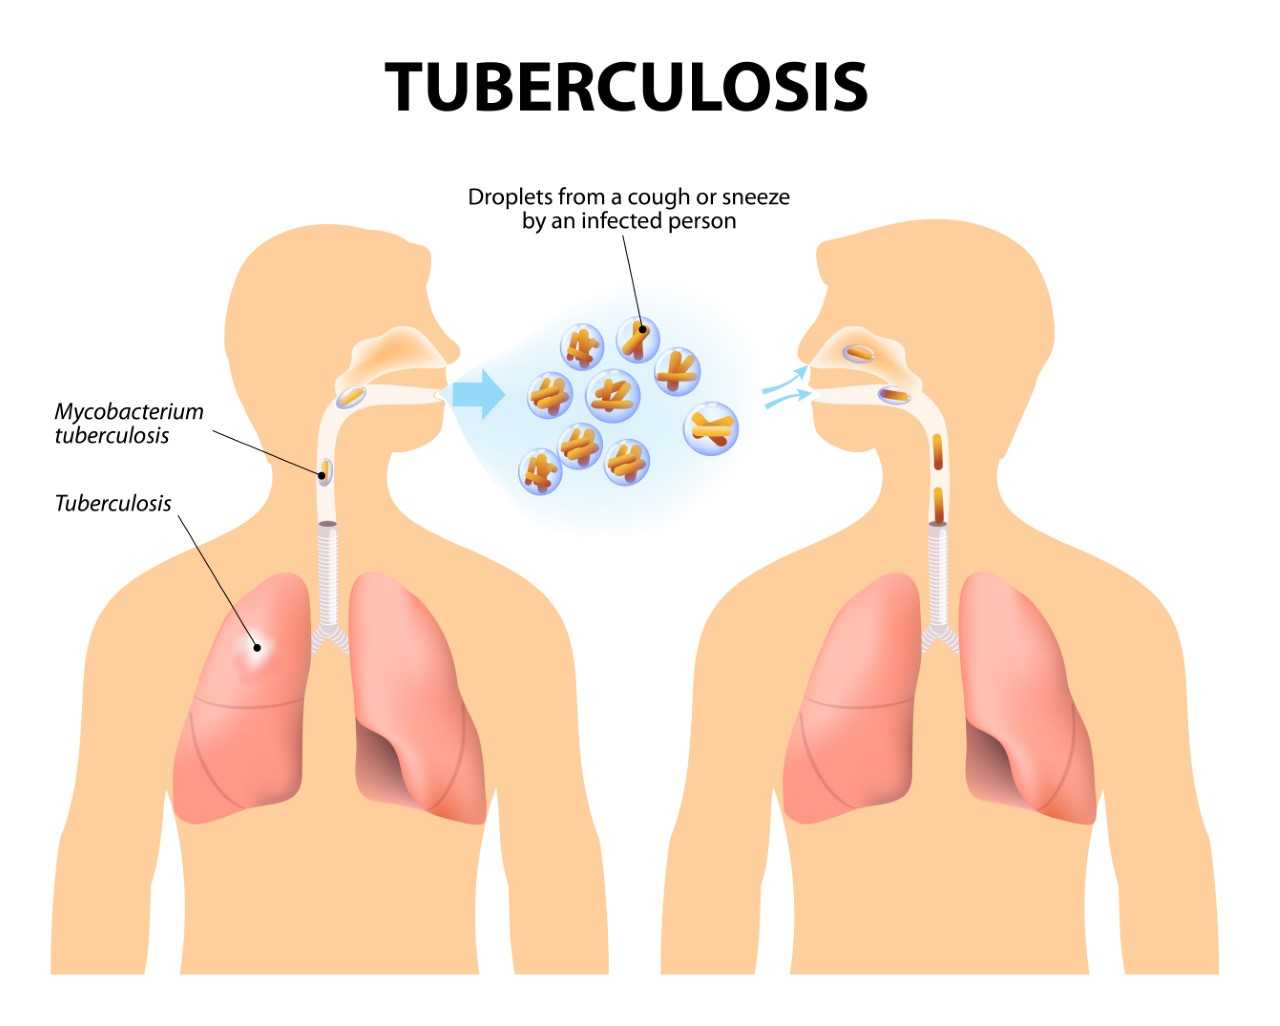 can tuberculosis travel longer distances